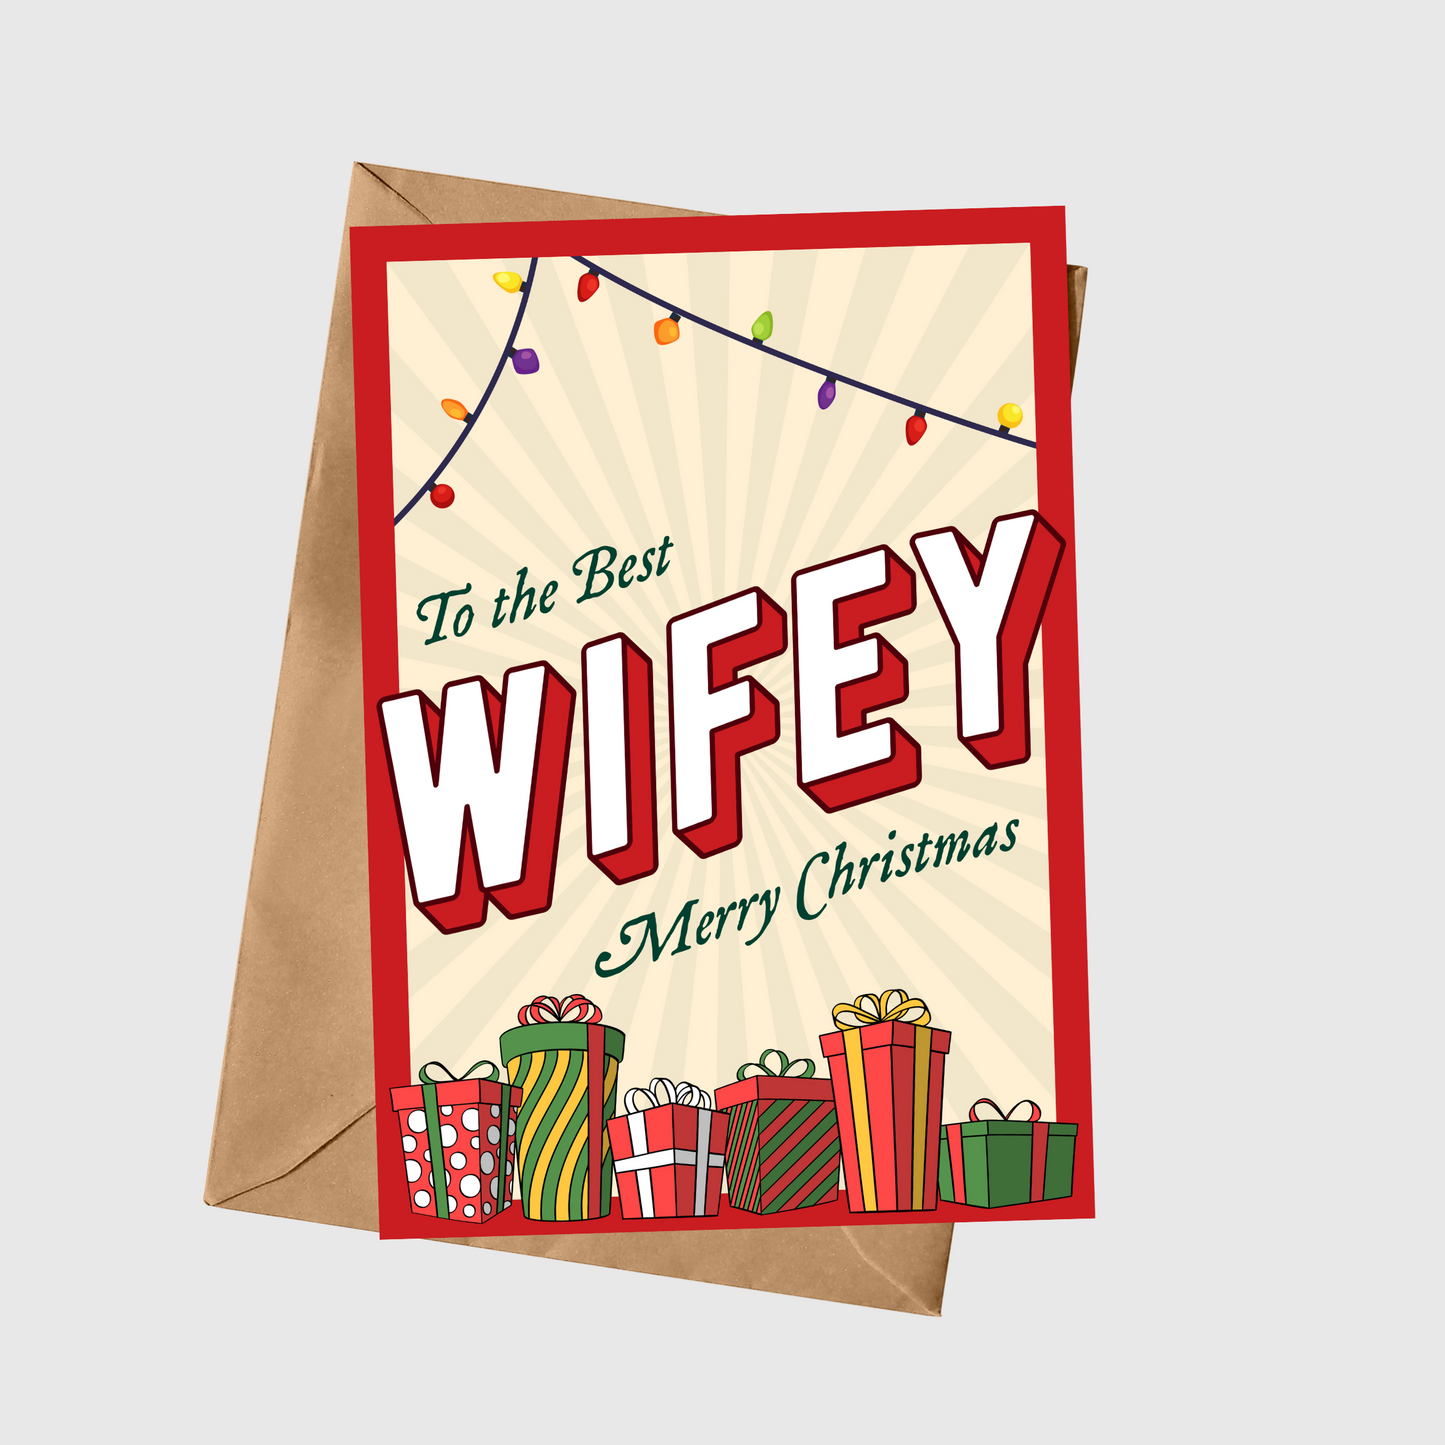 To The Best Wifey - Merry Christmas